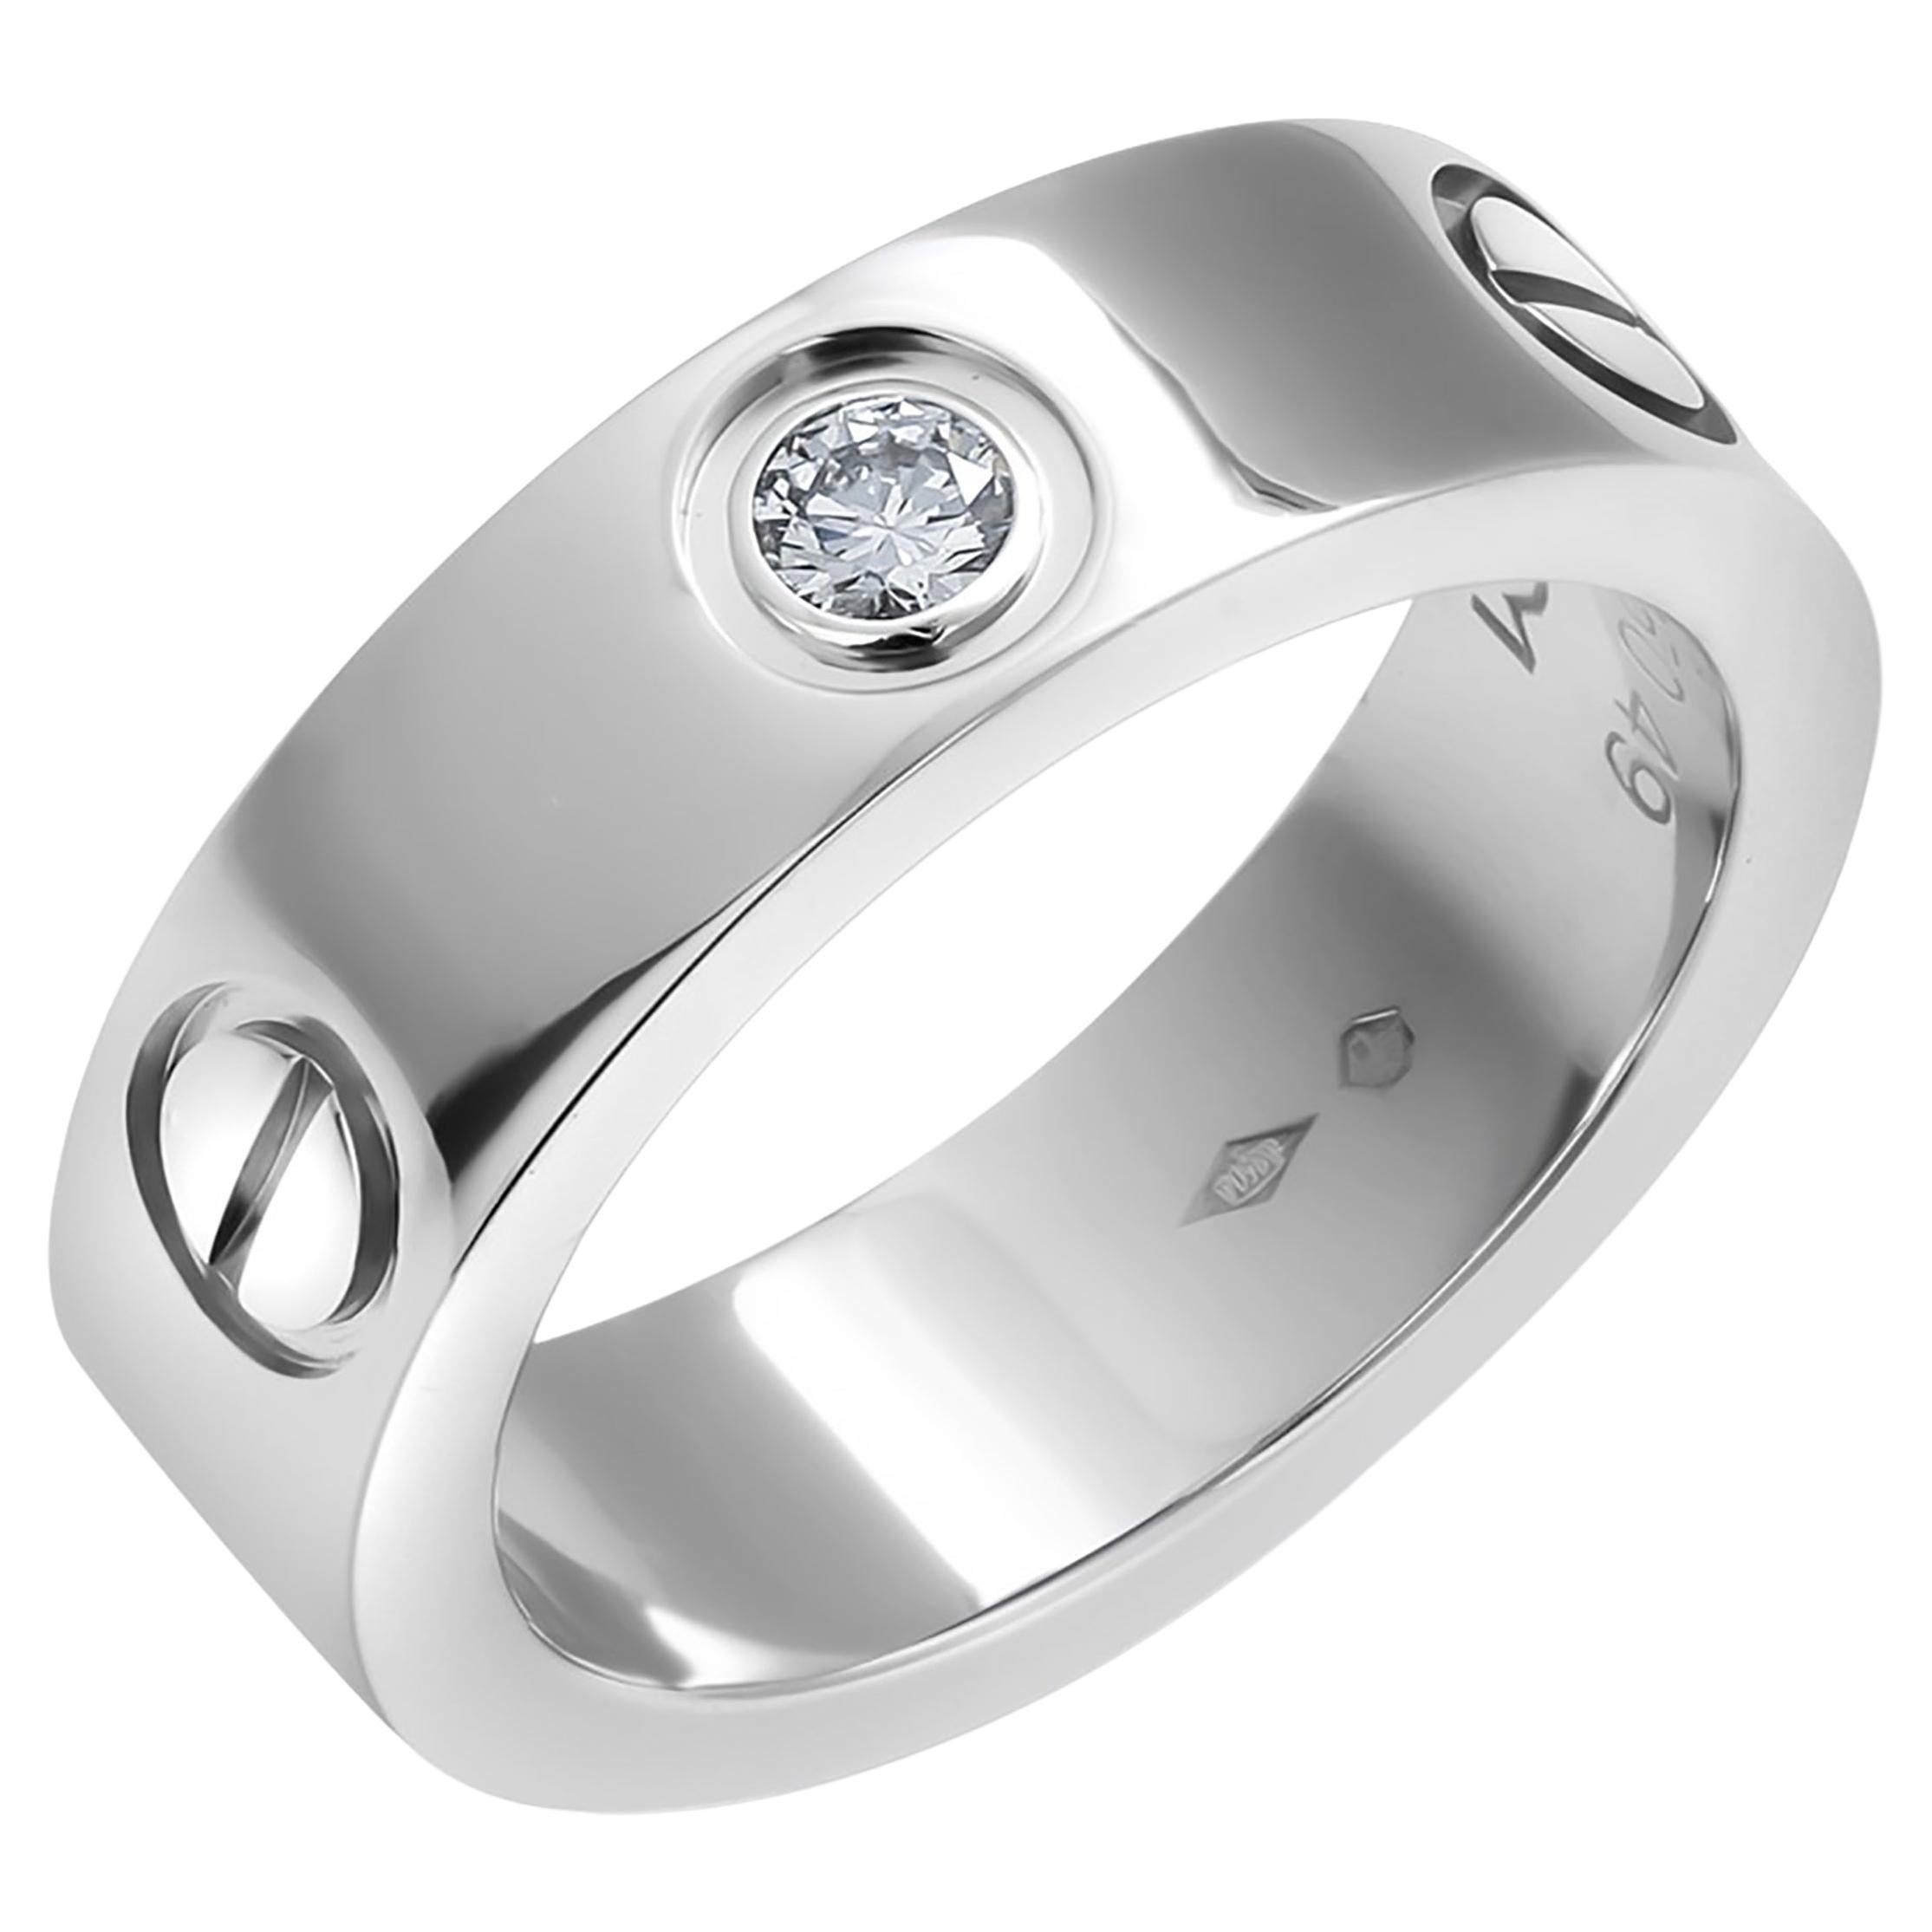 Is the Cartier Love ring timeless?